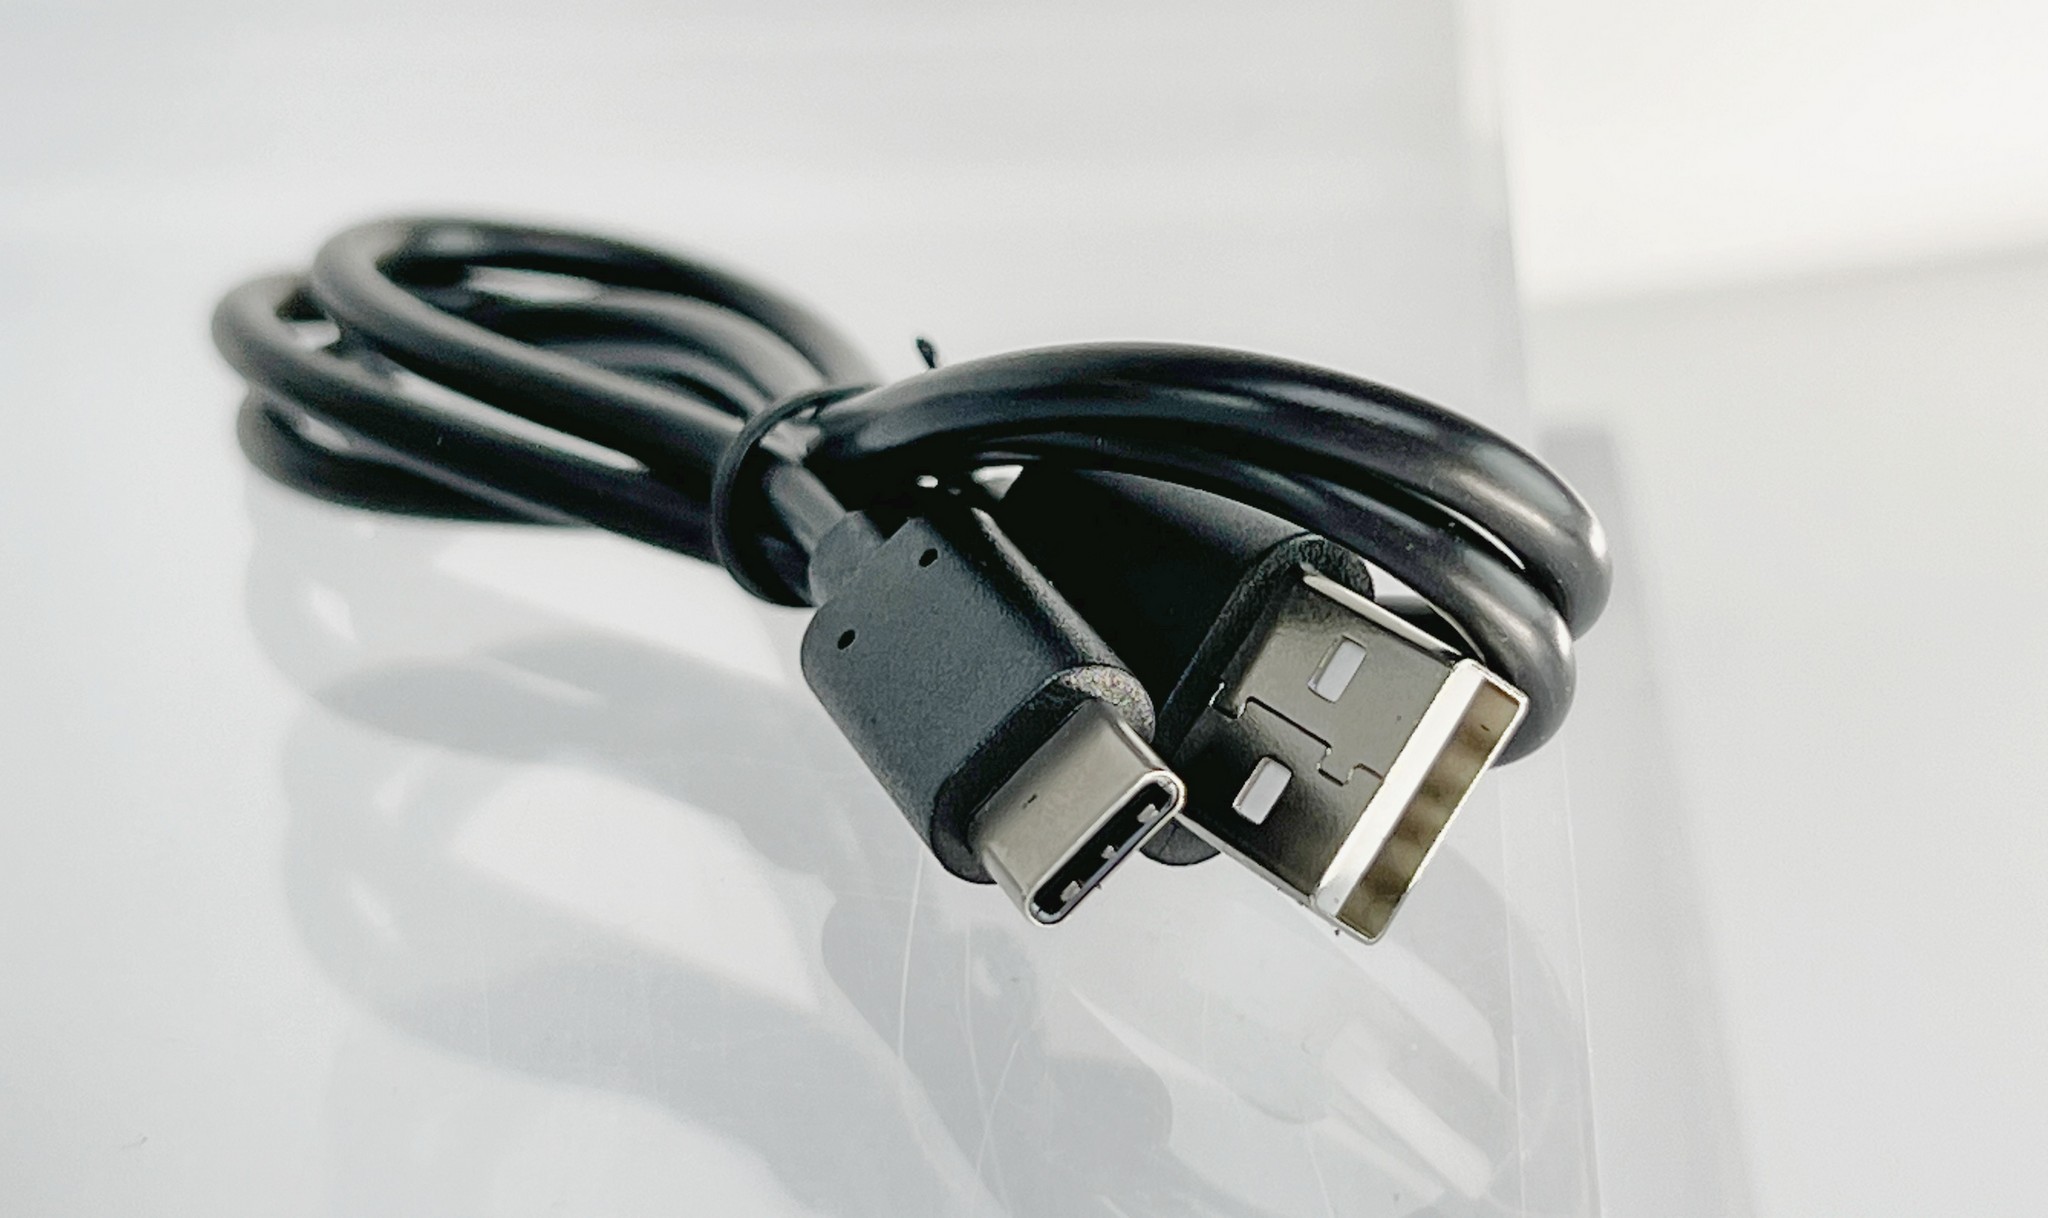 The USB C-type charging cable from the Cardo Packtalk Edge.